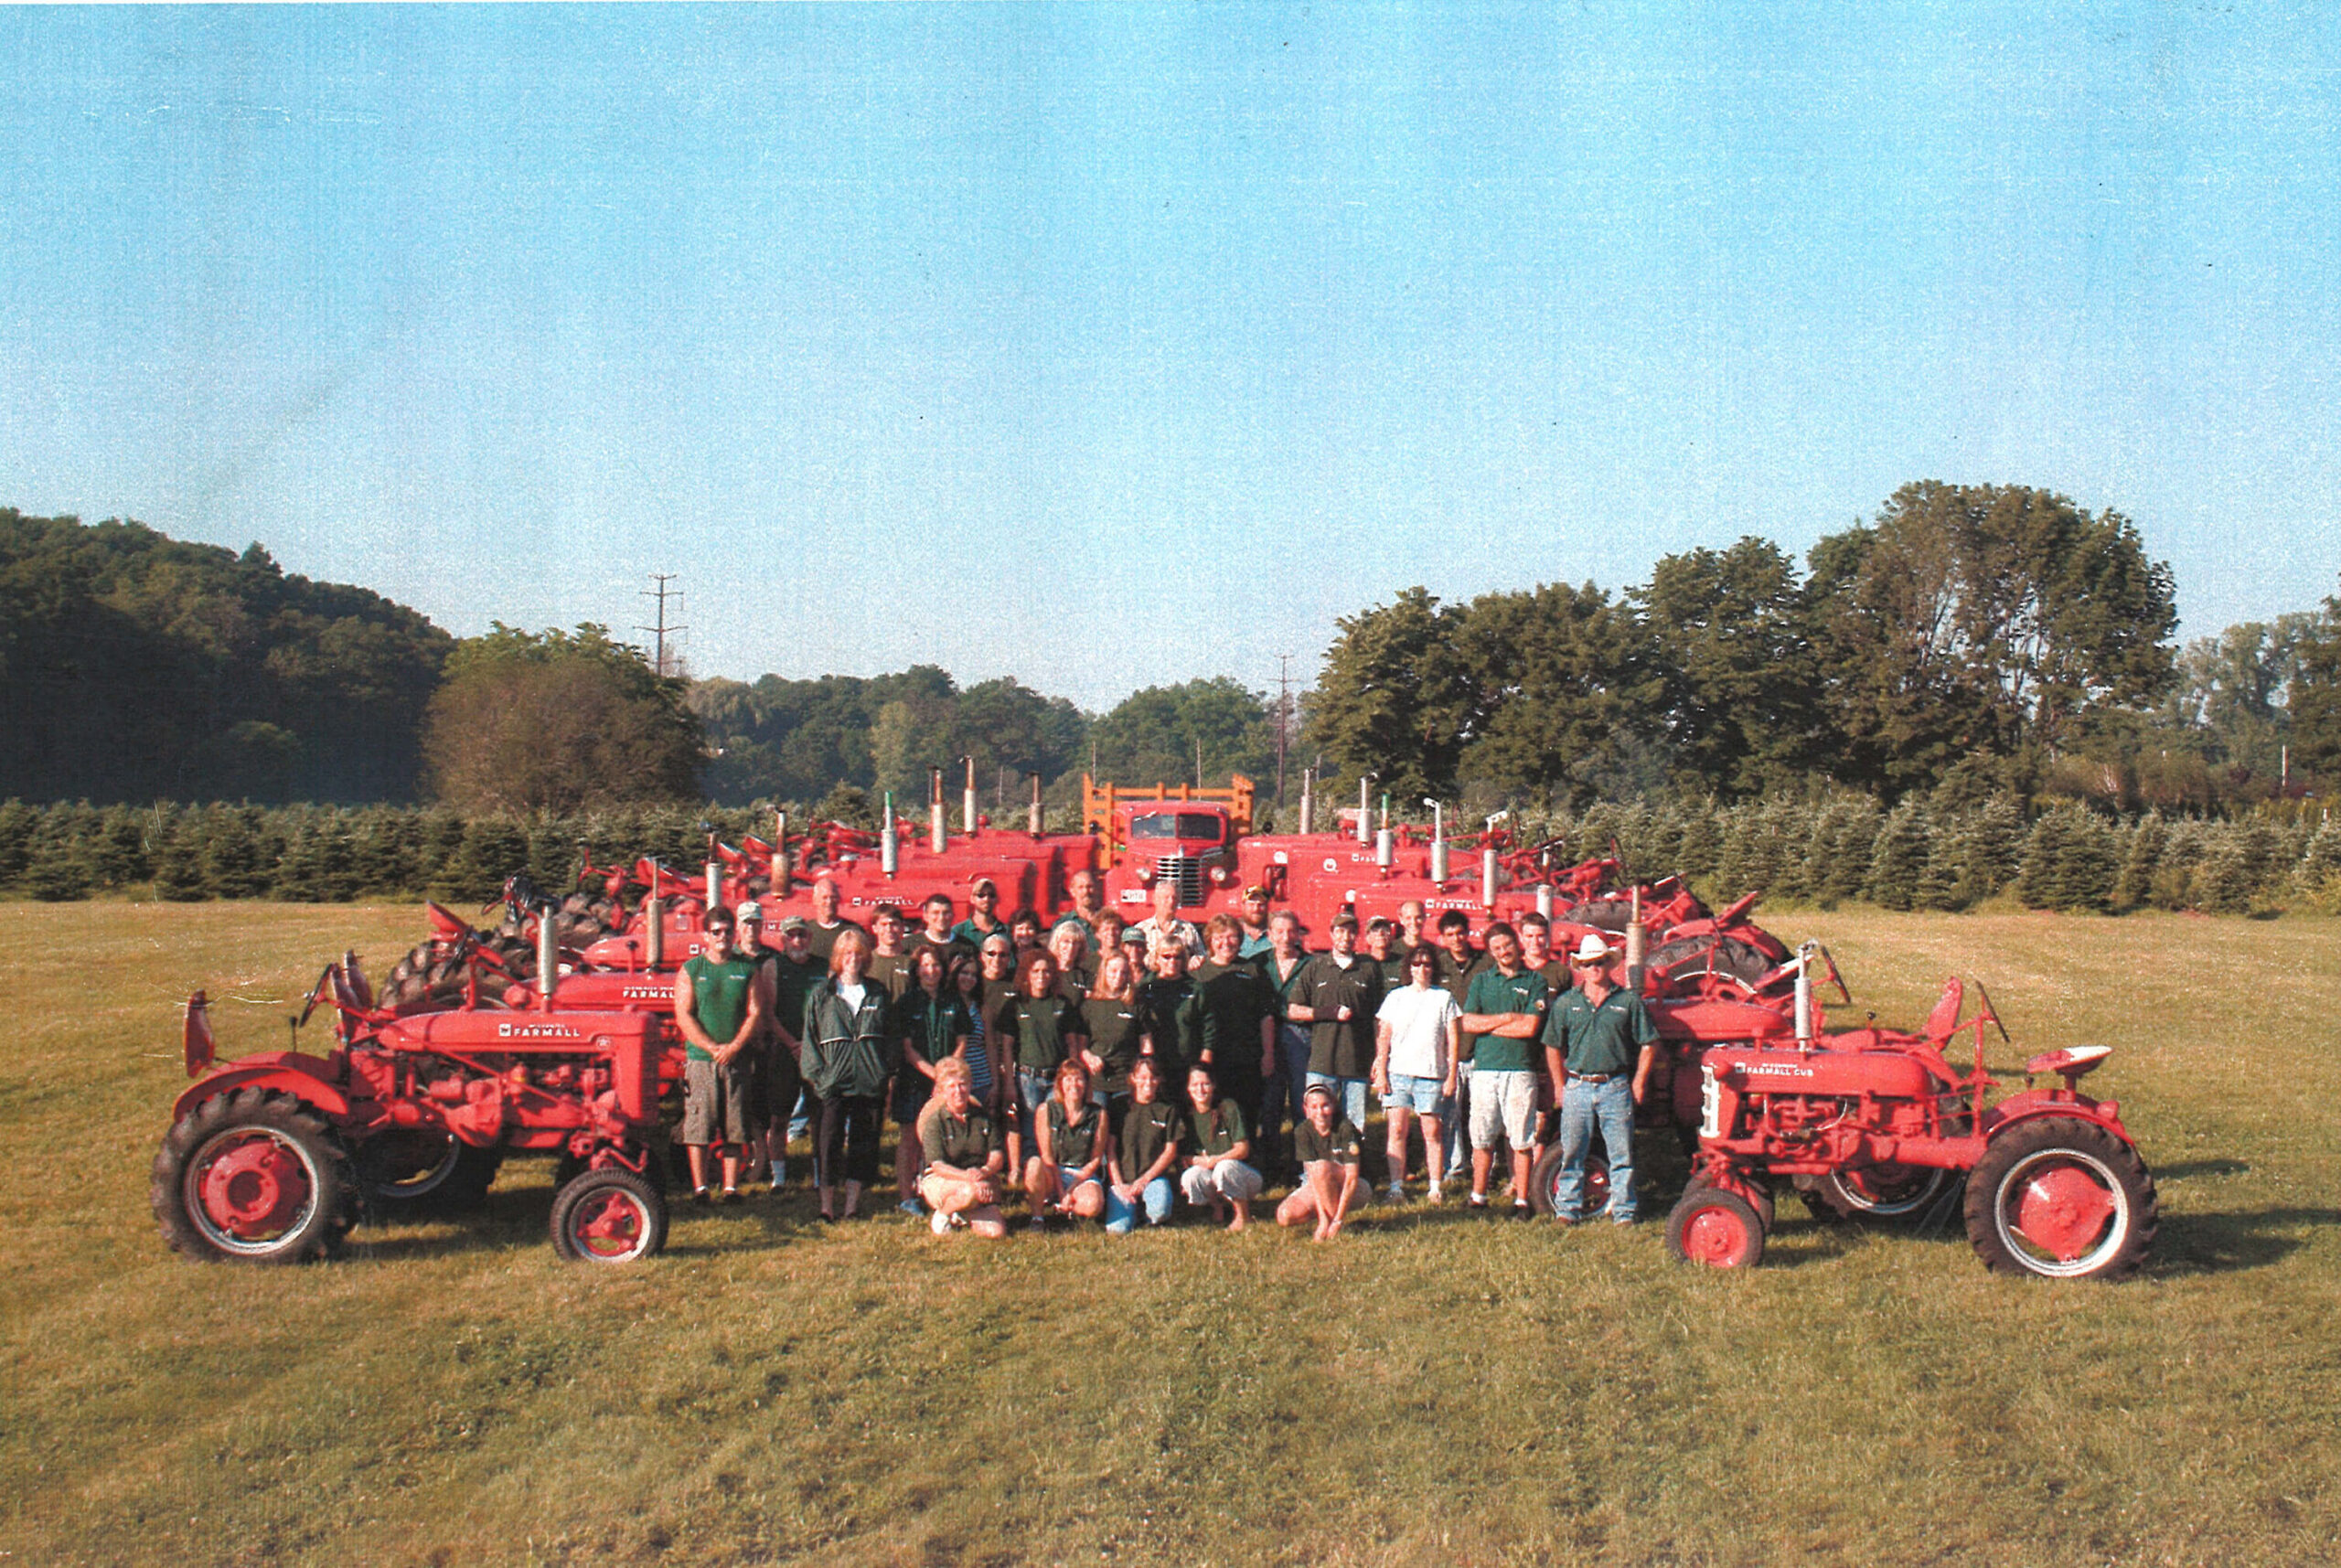 Group photo with red tractors.